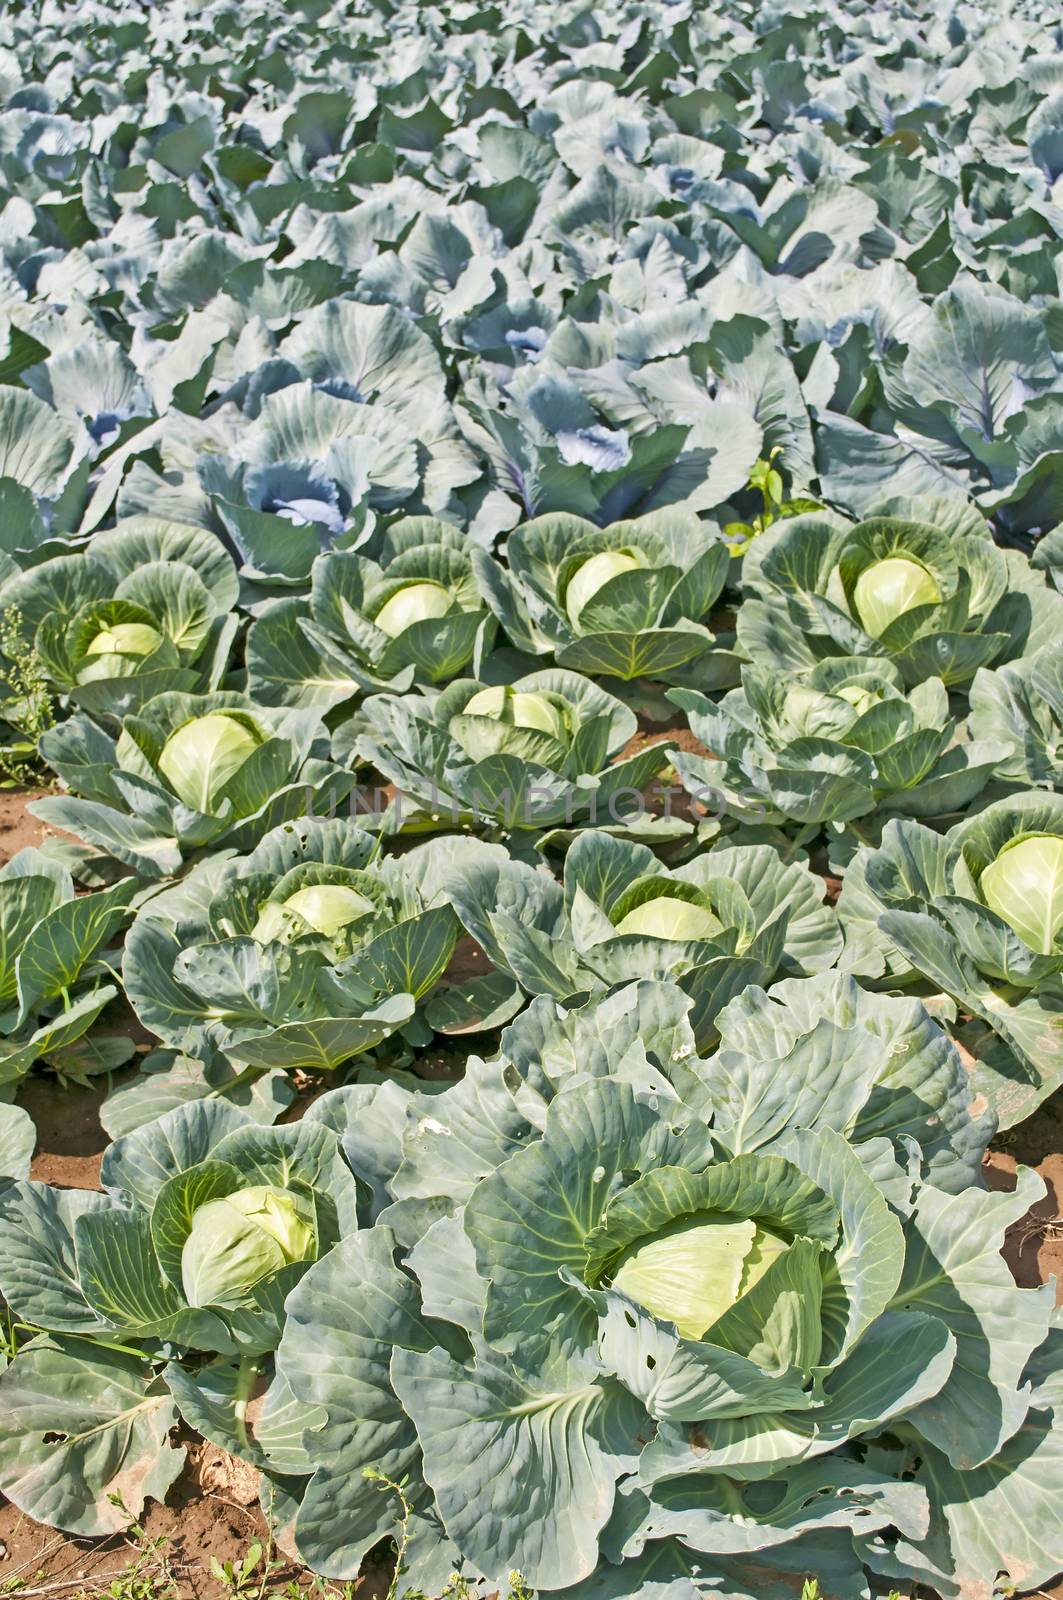 cultivation of kale